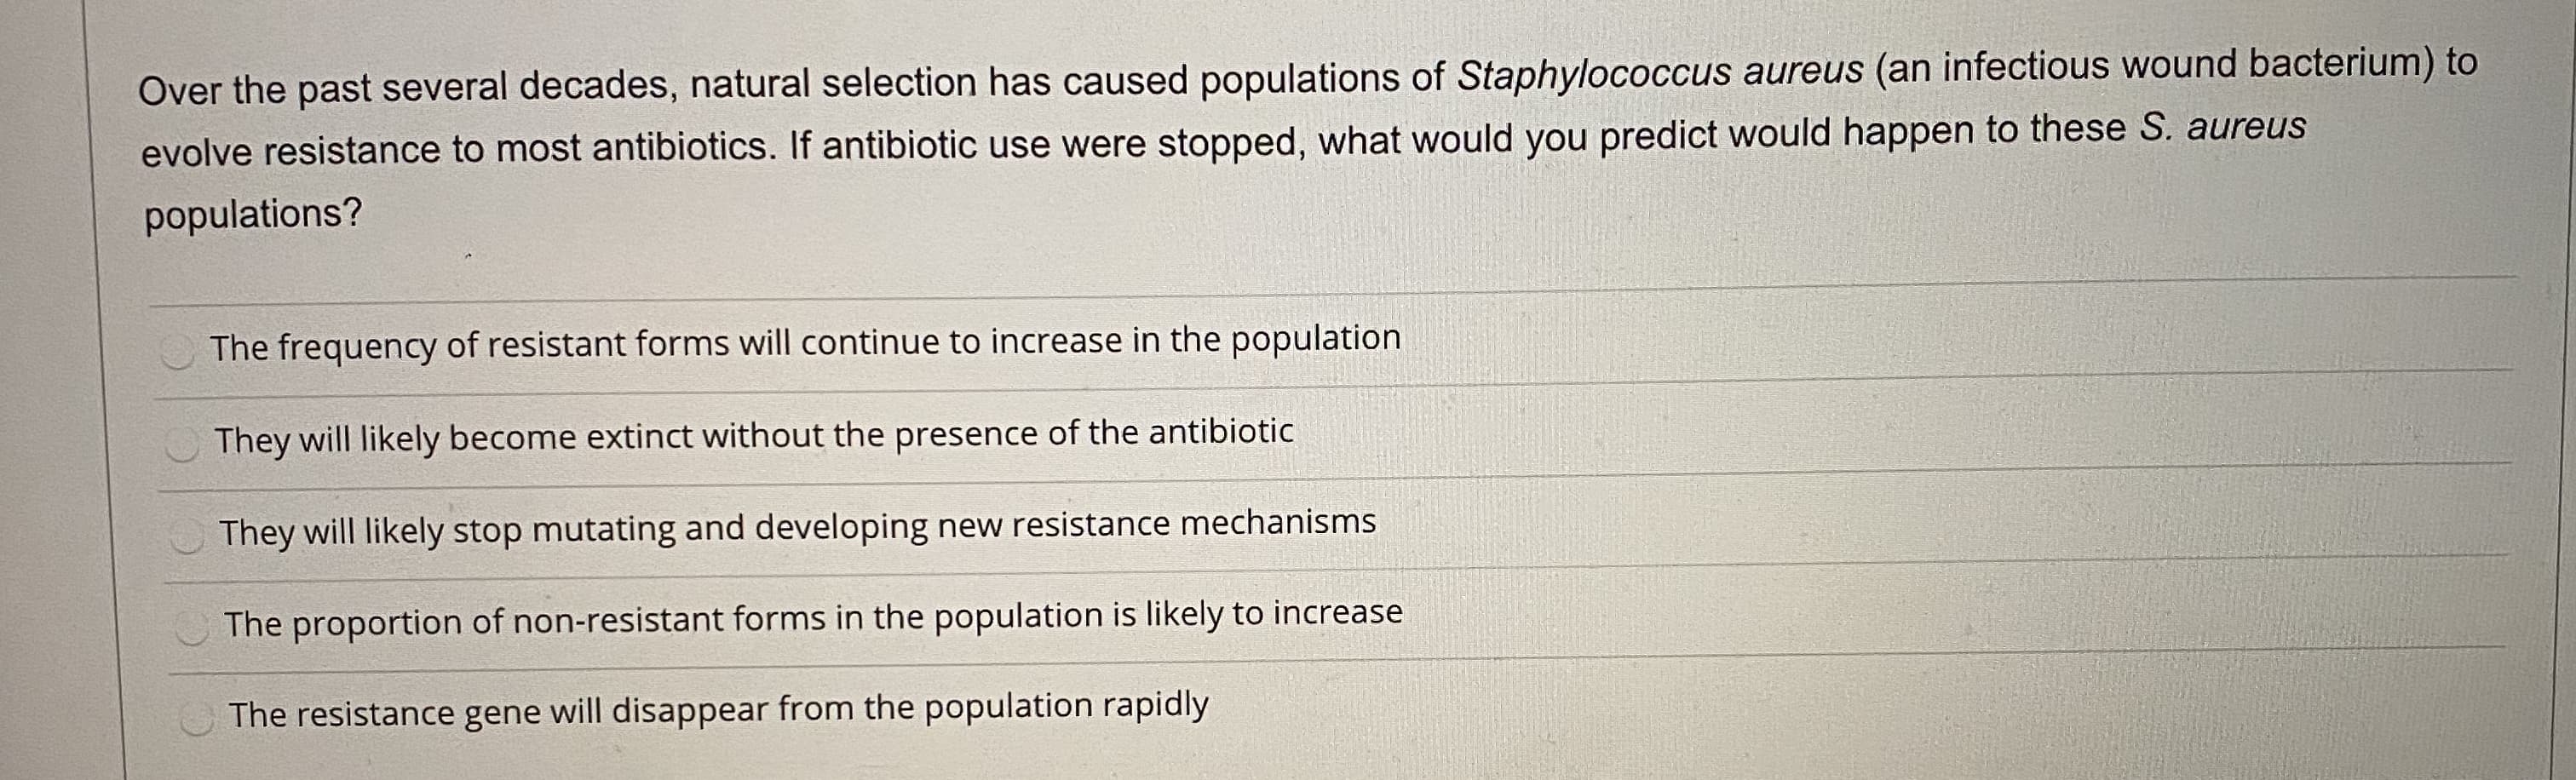 Over the past several decades, natural selection has caused populations of Staphylococcus aureus (an infectious wound bacterium) to
evolve resistance to most antibiotics. If antibiotic use were stopped, what would you predict would happen to these S. aureus
populations?
The frequency of resistant forms will continue to increase in the population
They will likely become extinct without the presence of the antibiotic
They will likely stop mutating and developing new resistance mechanisms
The proportion of non-resistant forms in the population is likely to increase
The resistance gene will disappear from the population rapidly
